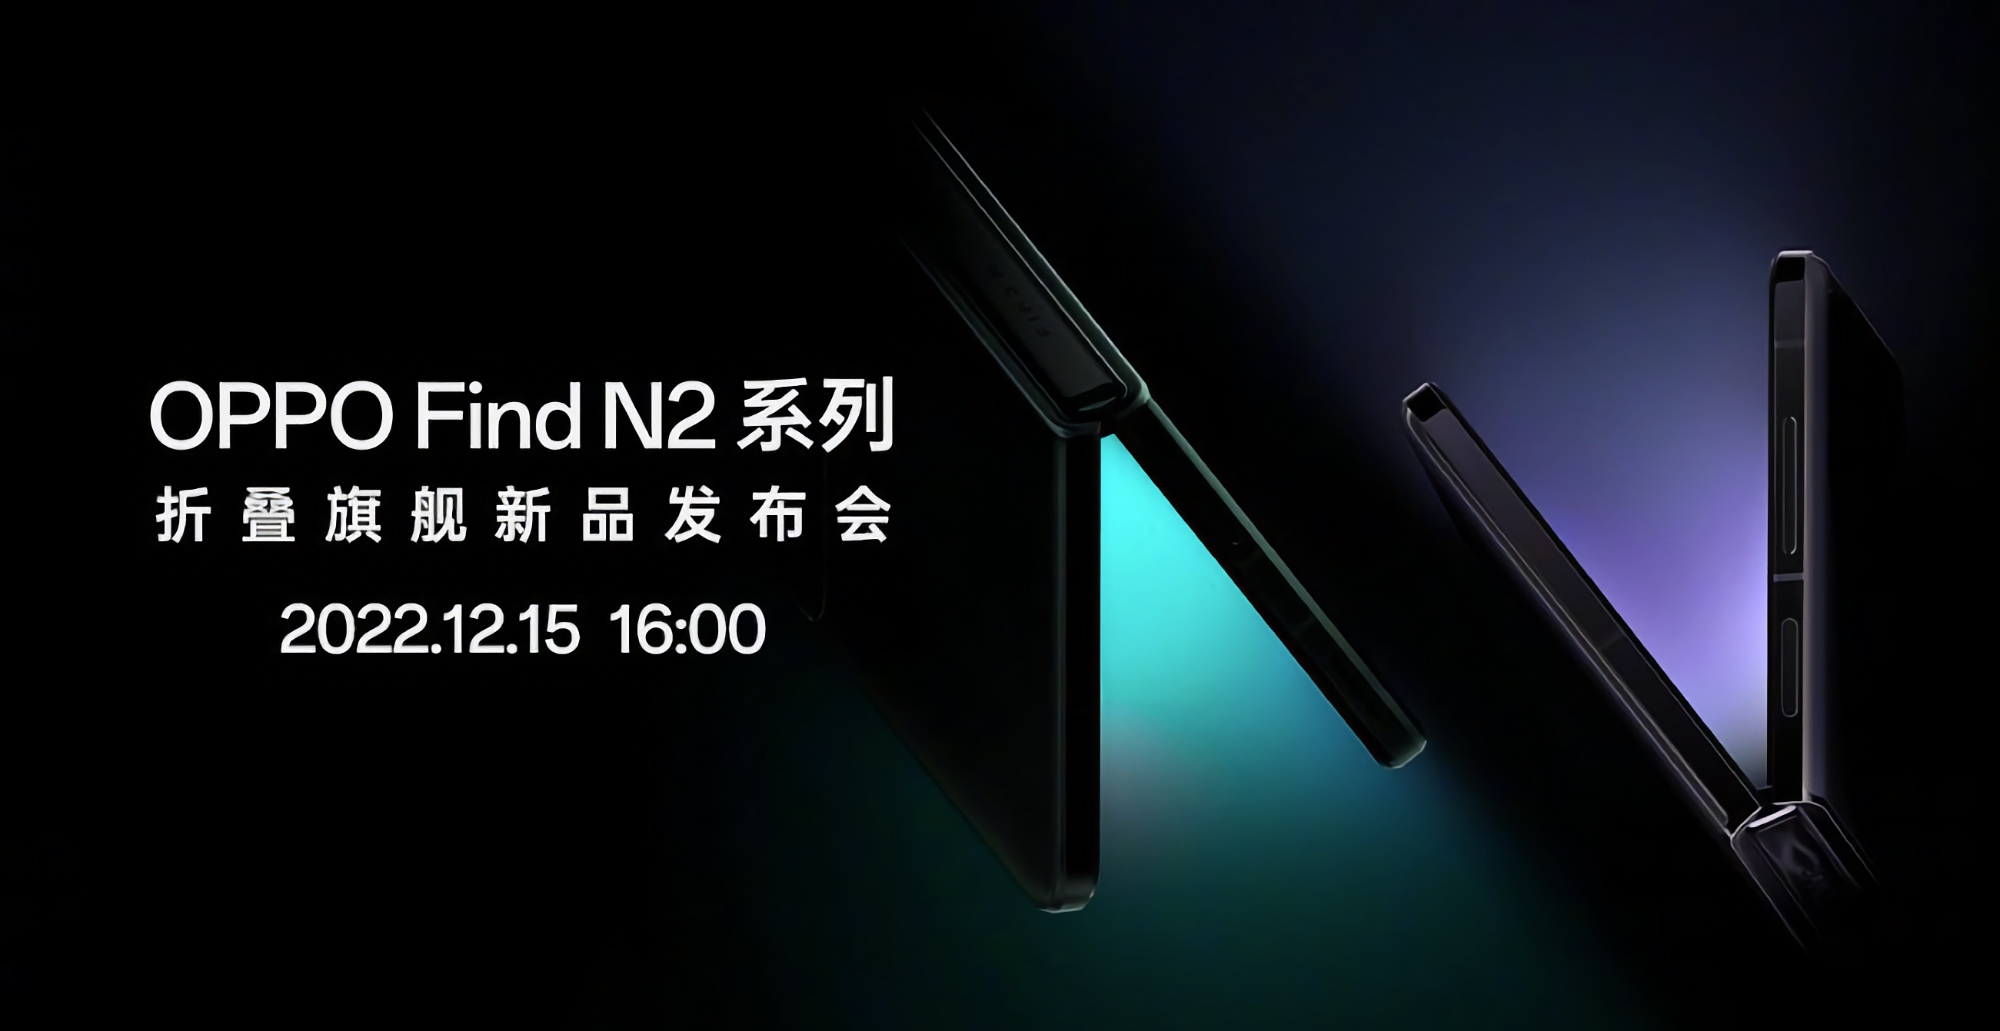 OPPO announced the introduction date for foldable smartphones Find N2 Fold and Find N2 Flip